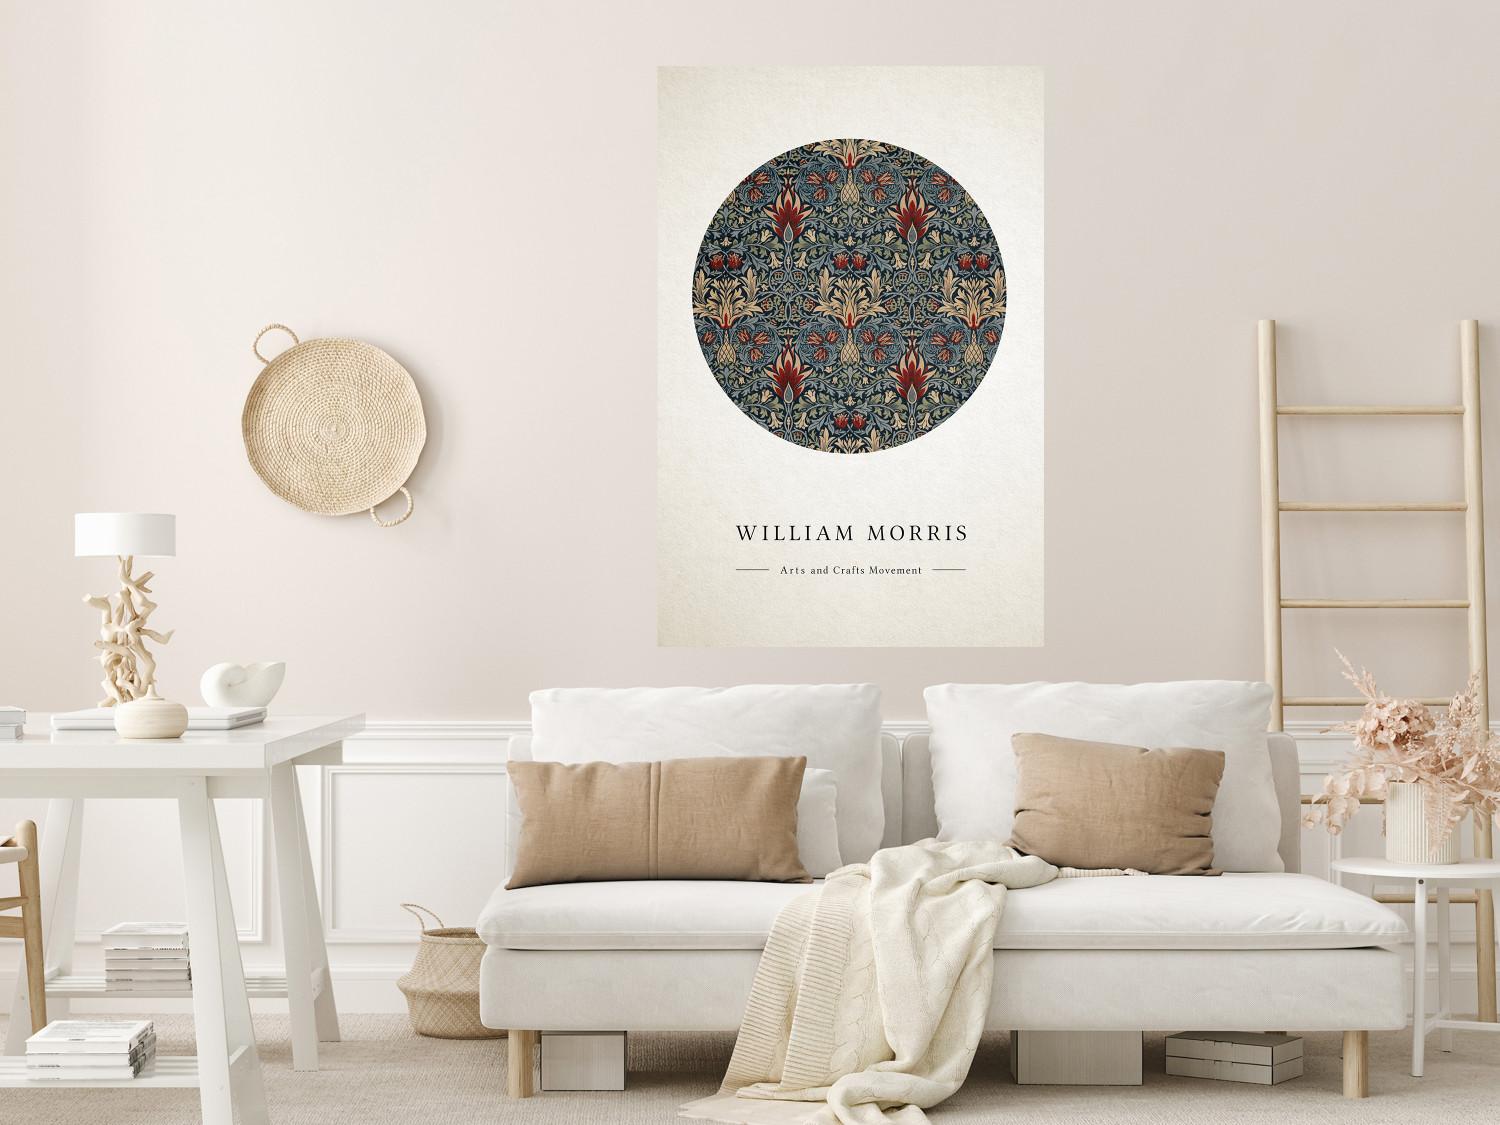 Poster For William Morris - English texts and abstract ornaments